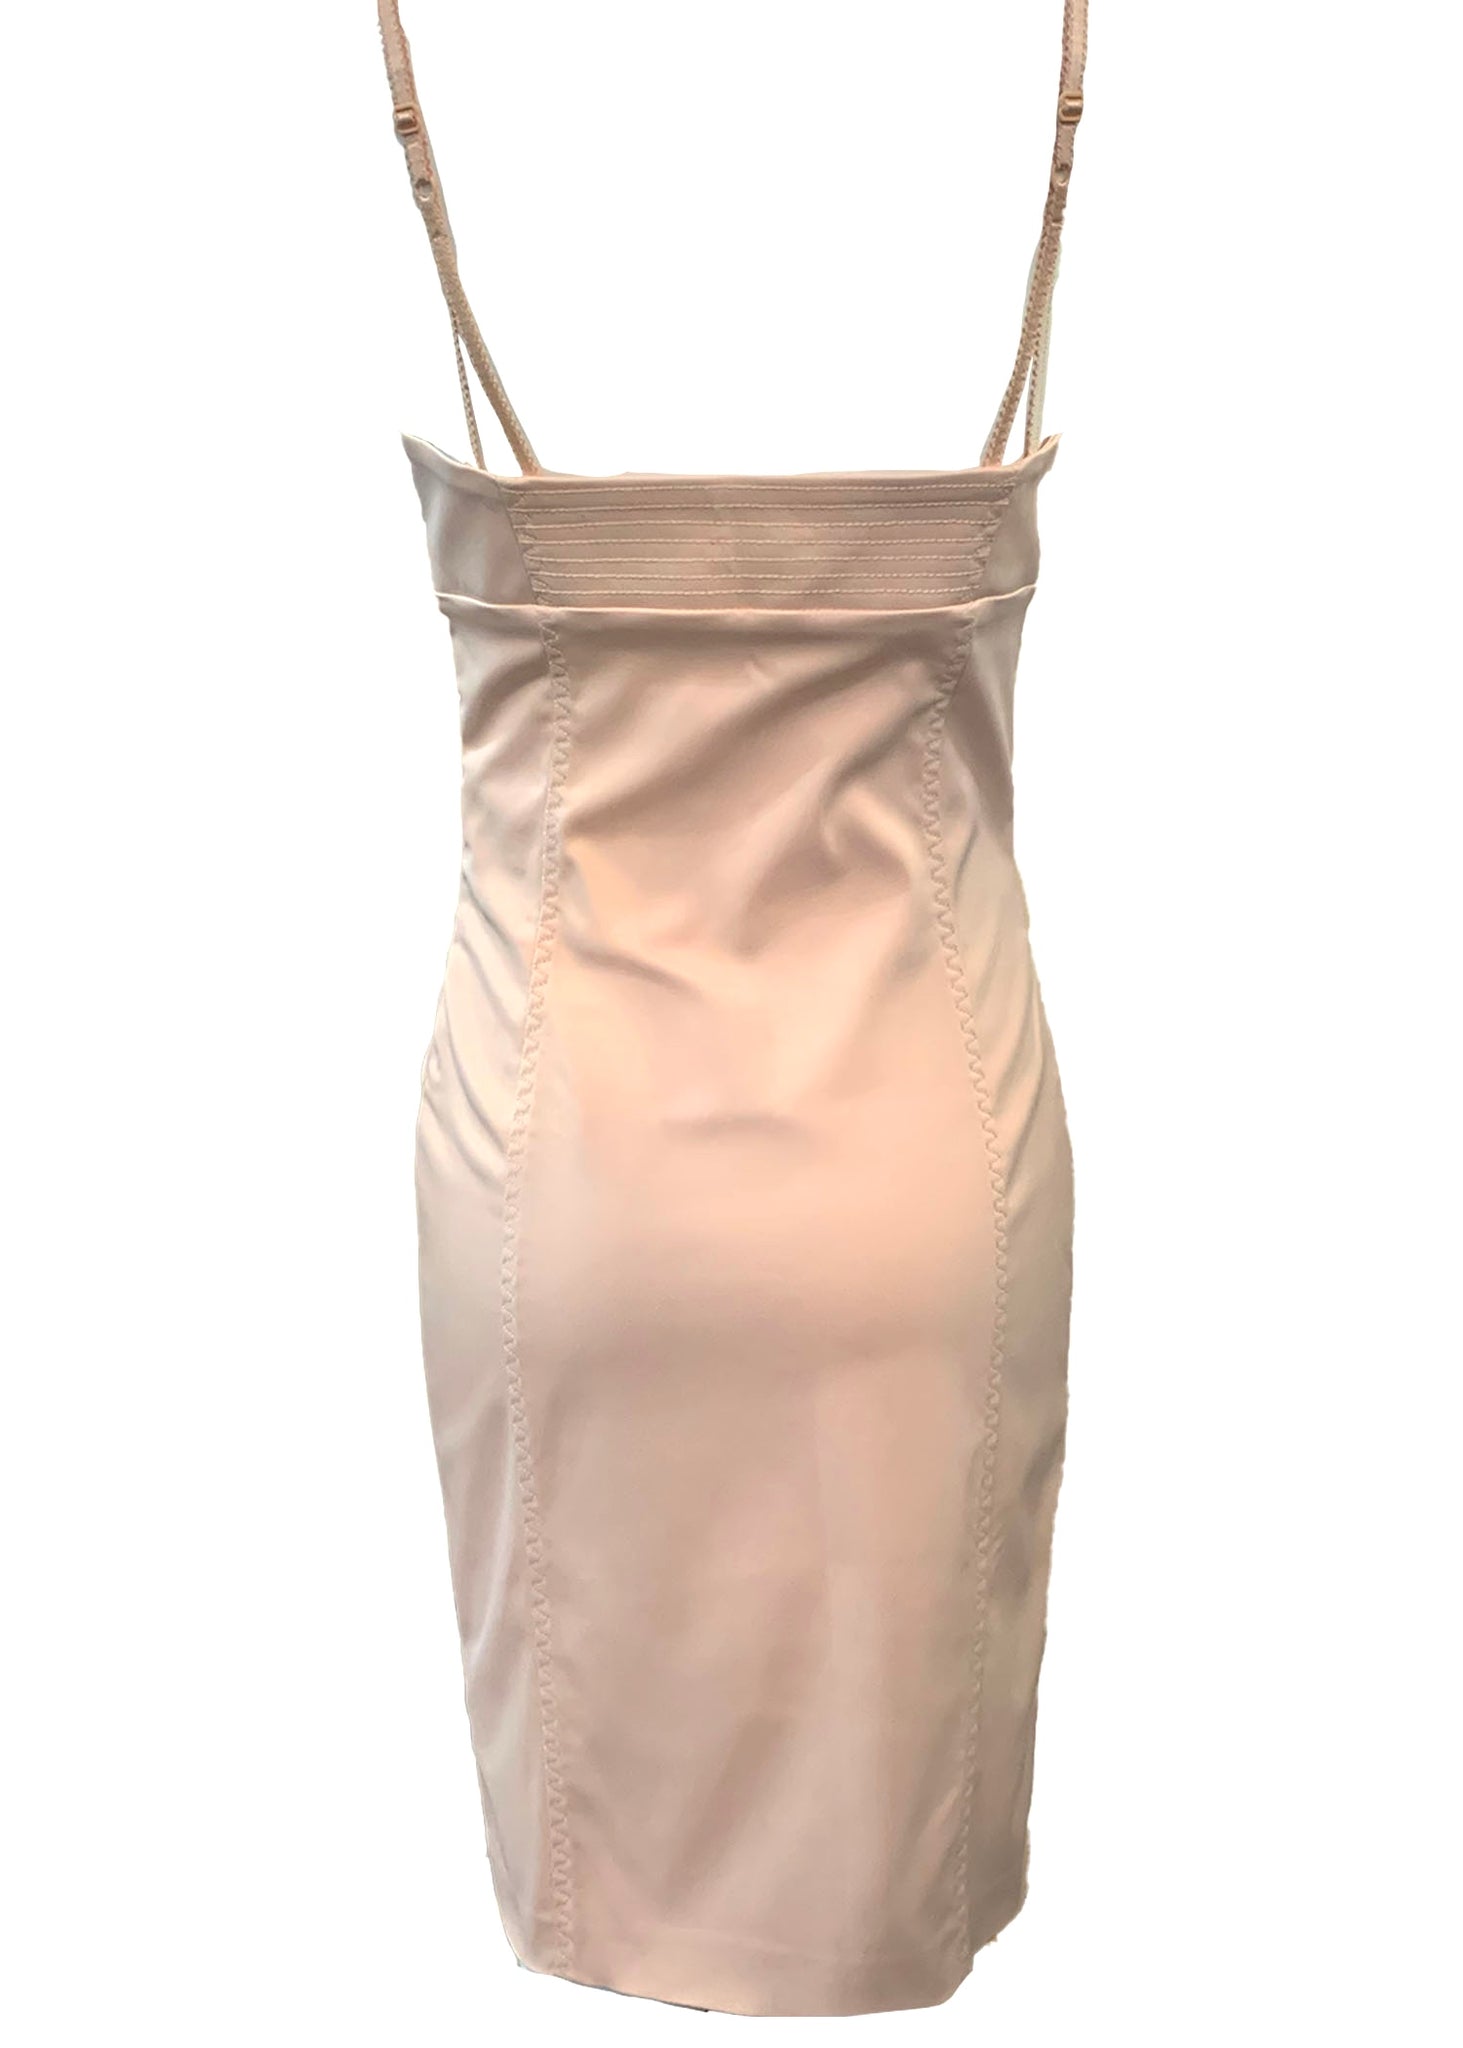    John  Galliano Early 2000s Pink Lingerie "Girdle"Dress BACK 3 of 5